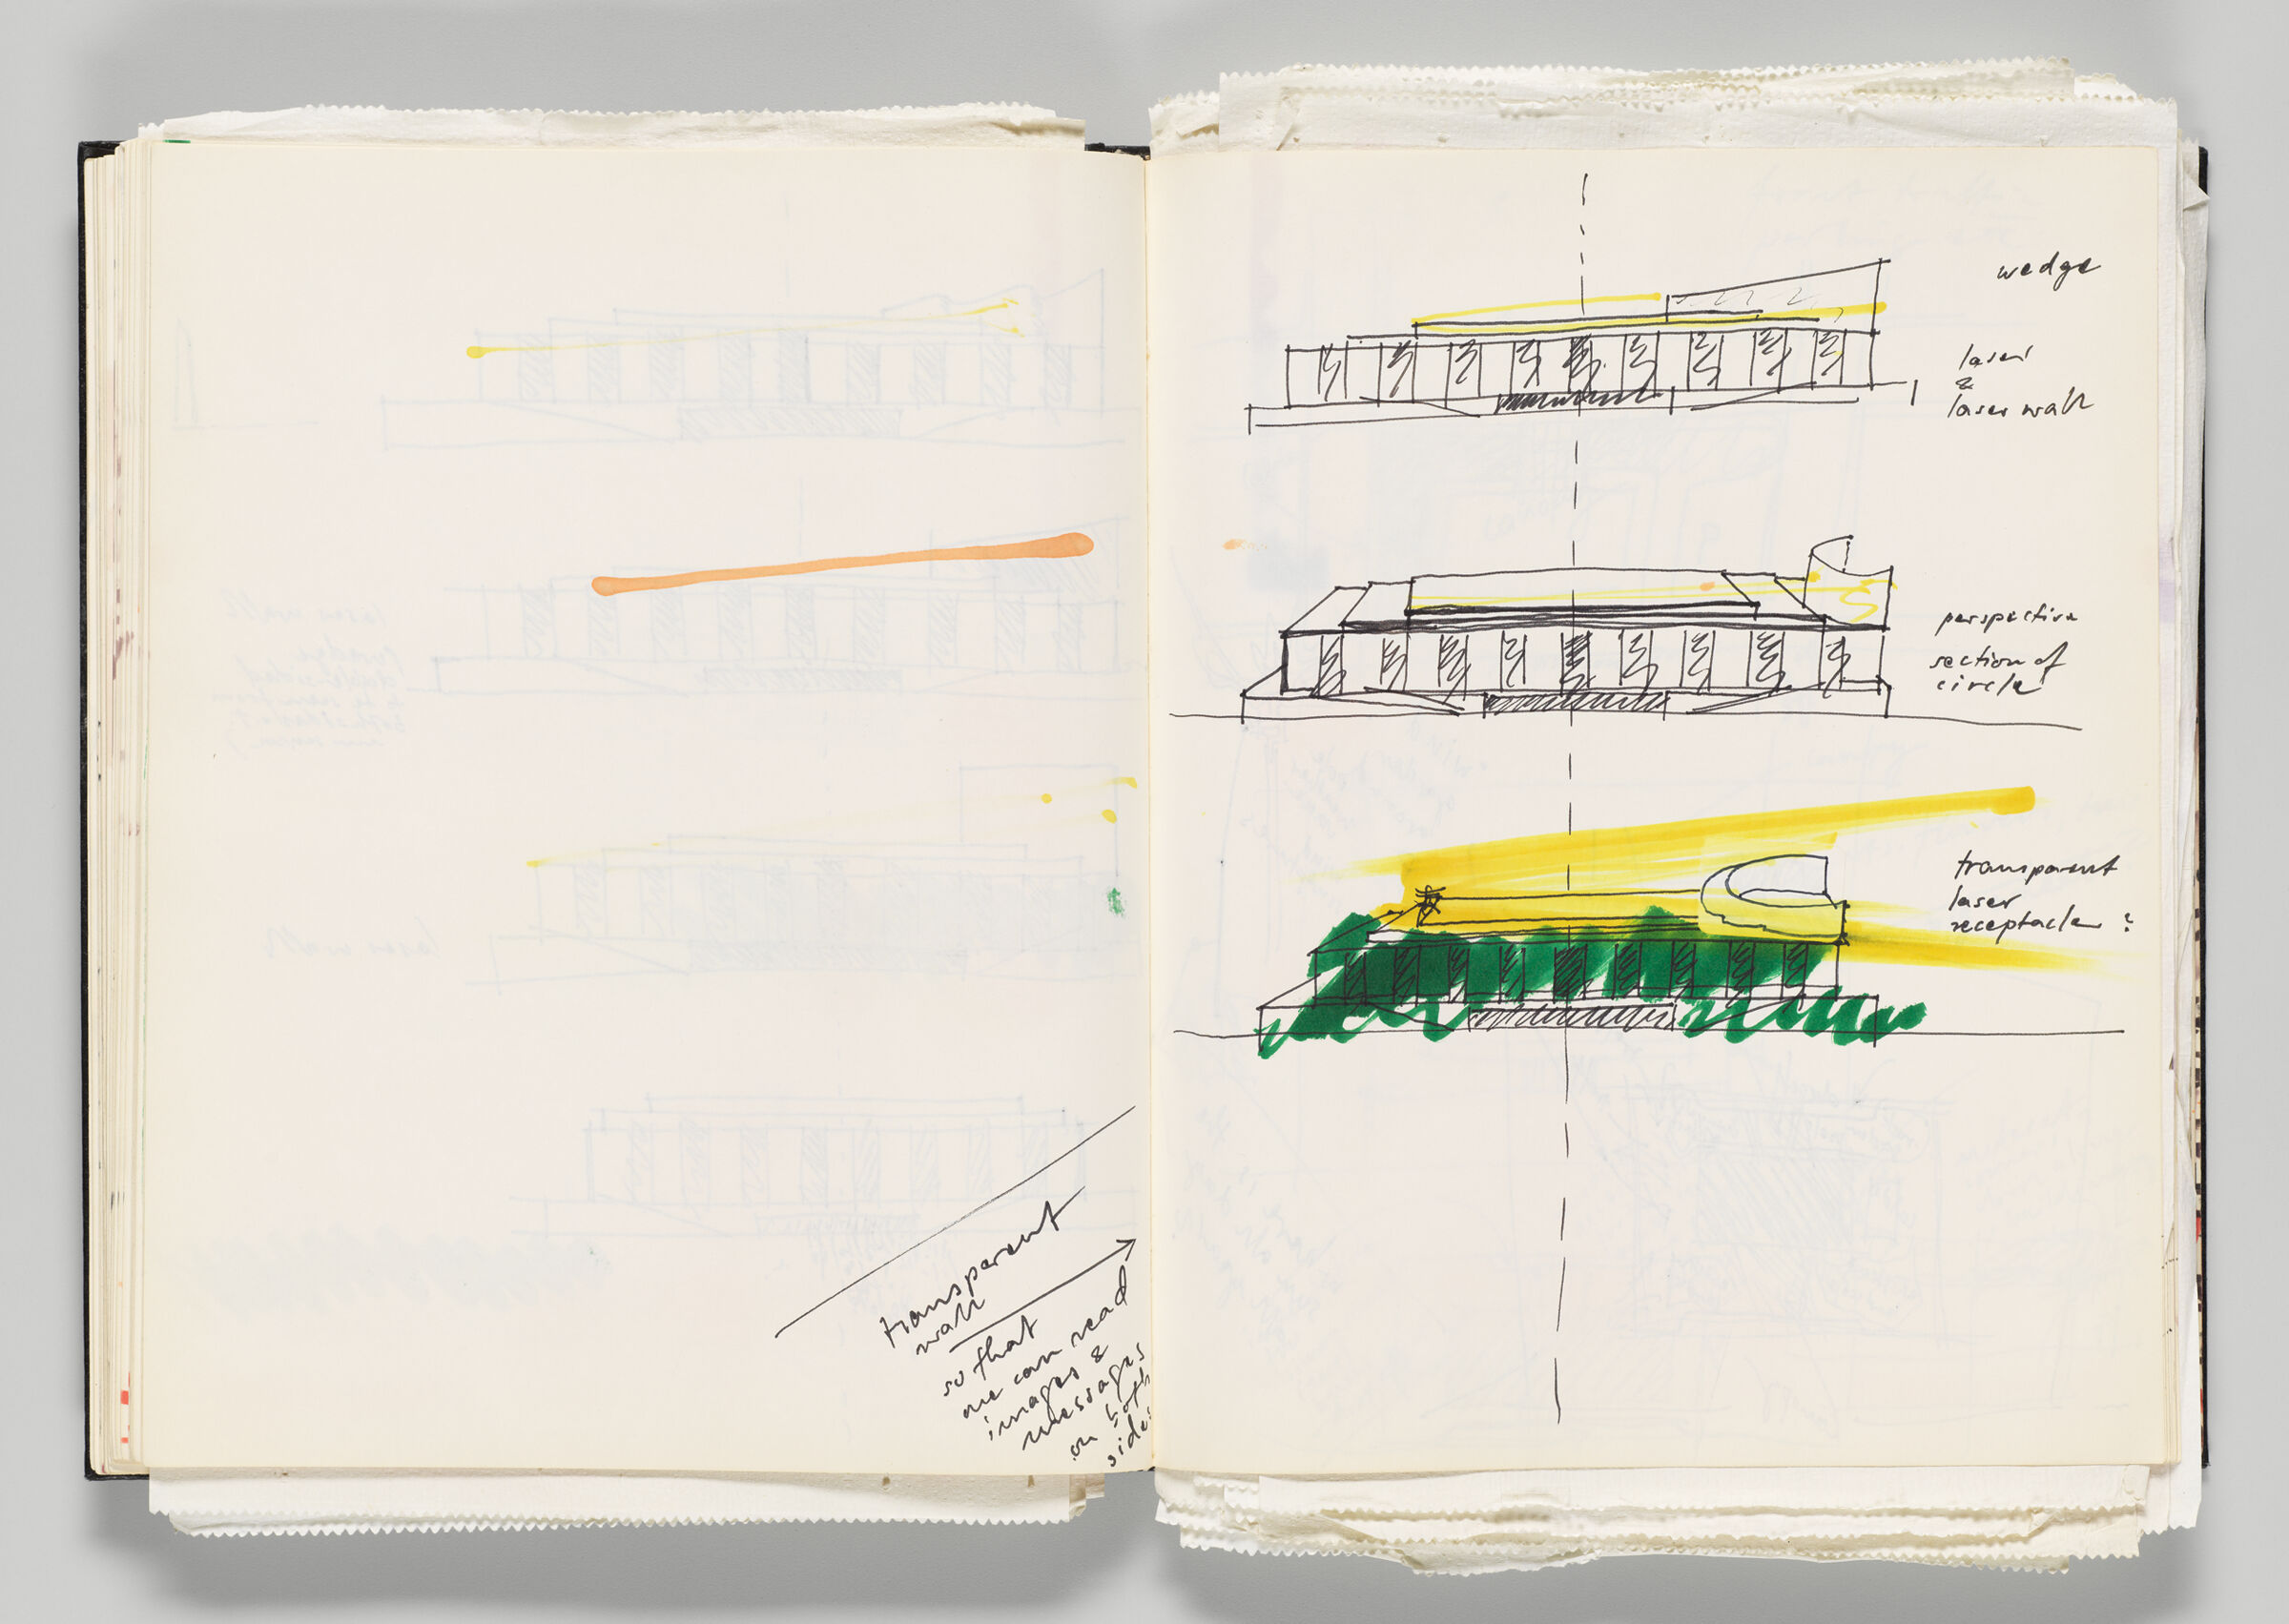 Untitled (Notes And Bleed-Through Of Previous Page, Left Page); Untitled (Laser Wall Sketches, Right Page)